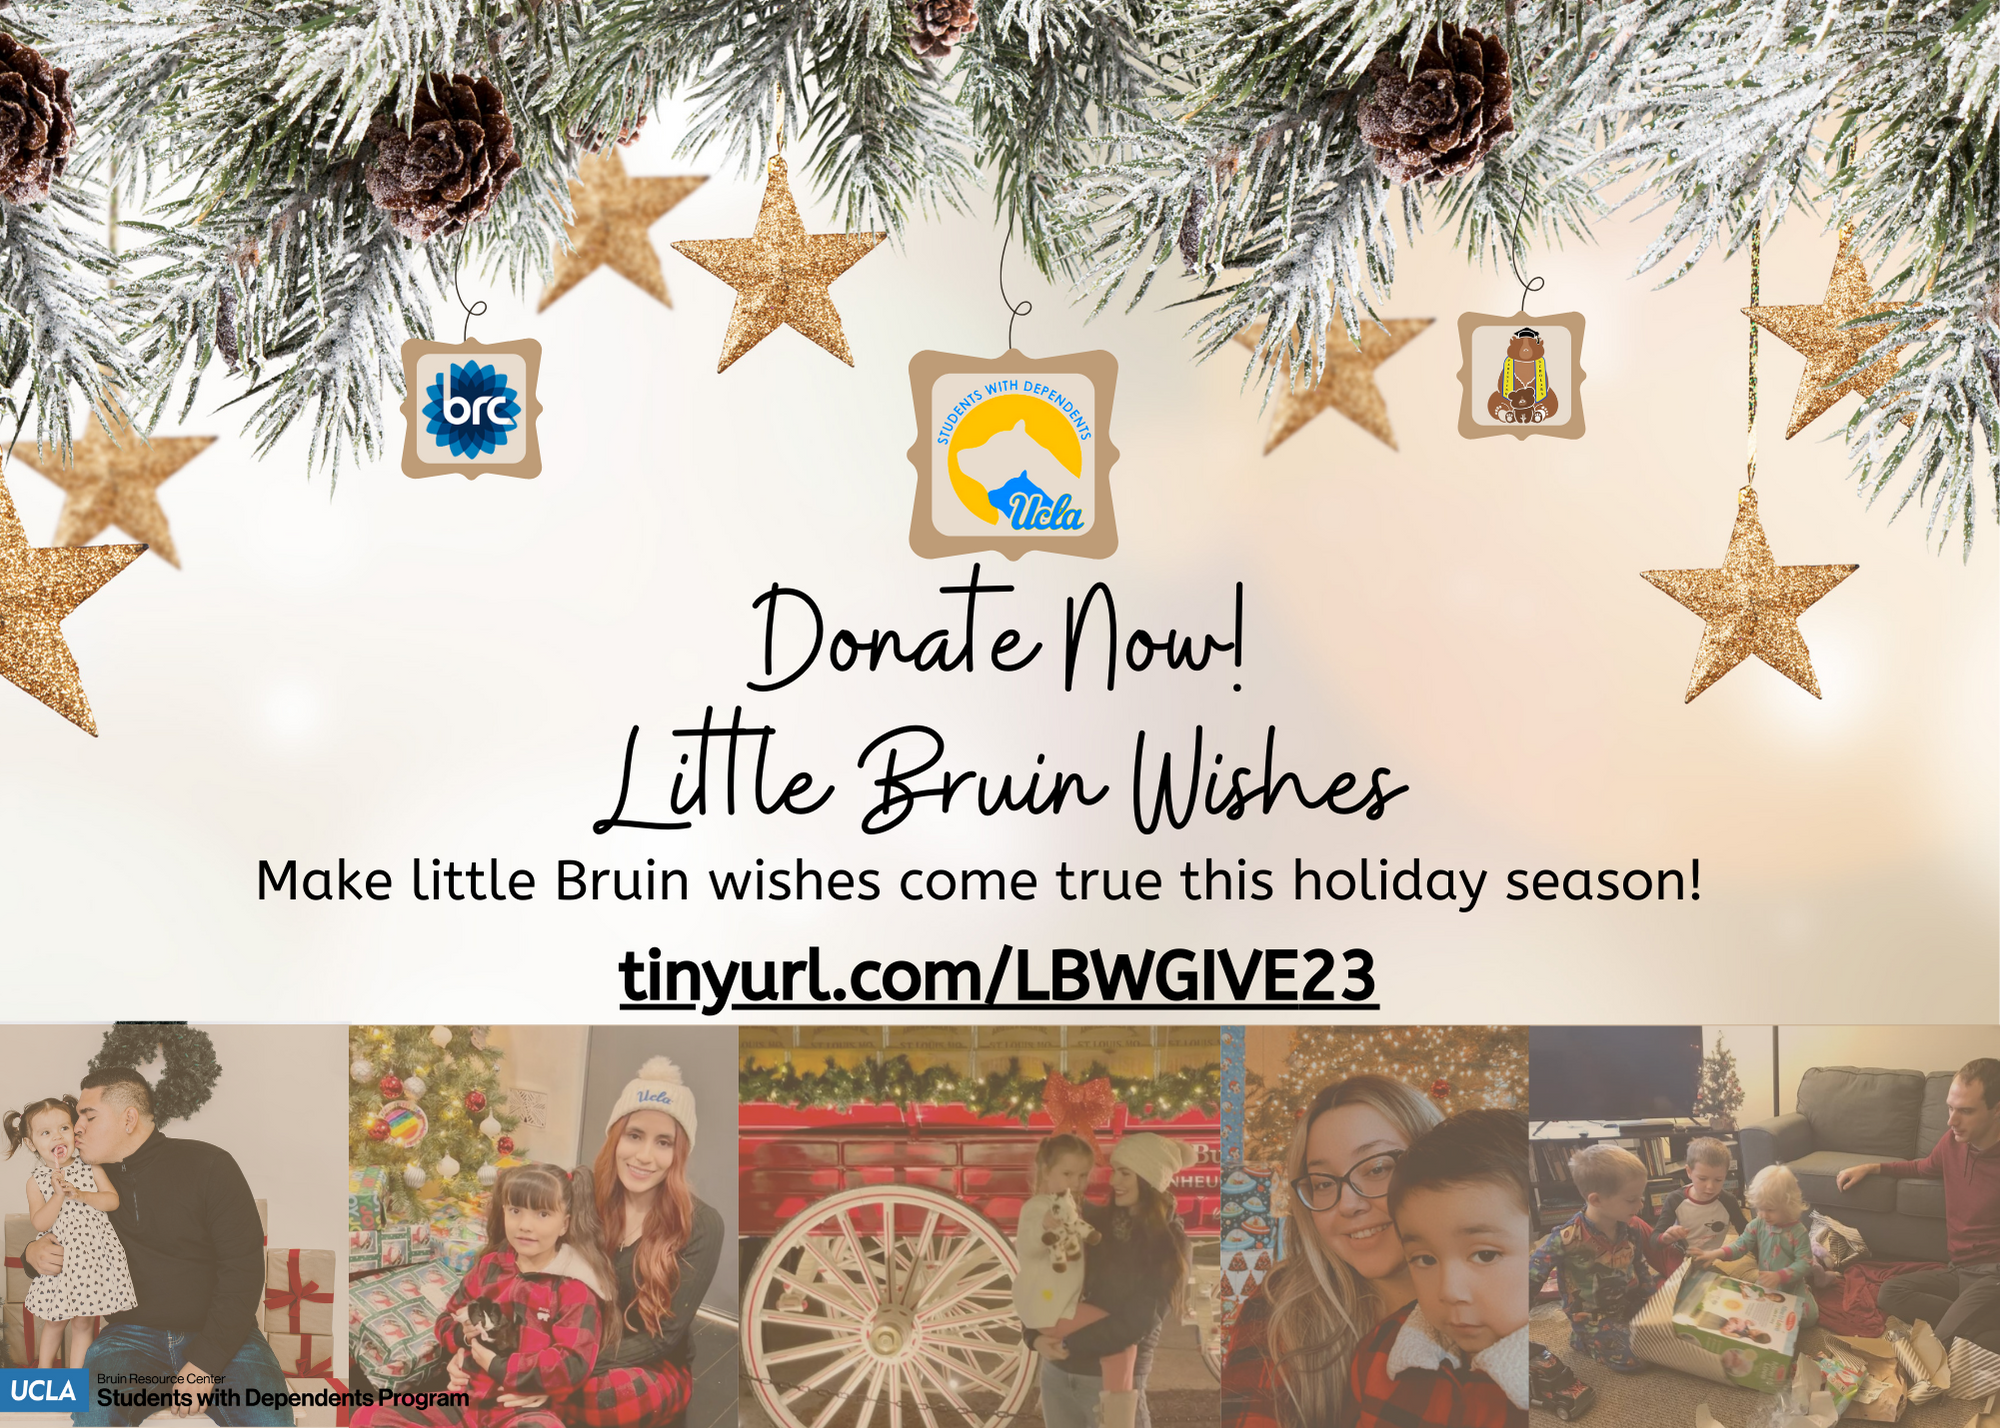 Donate Now! Little Bruin Wishes, Make little Bruin wishes come true this holiday season. Photos of students and their children